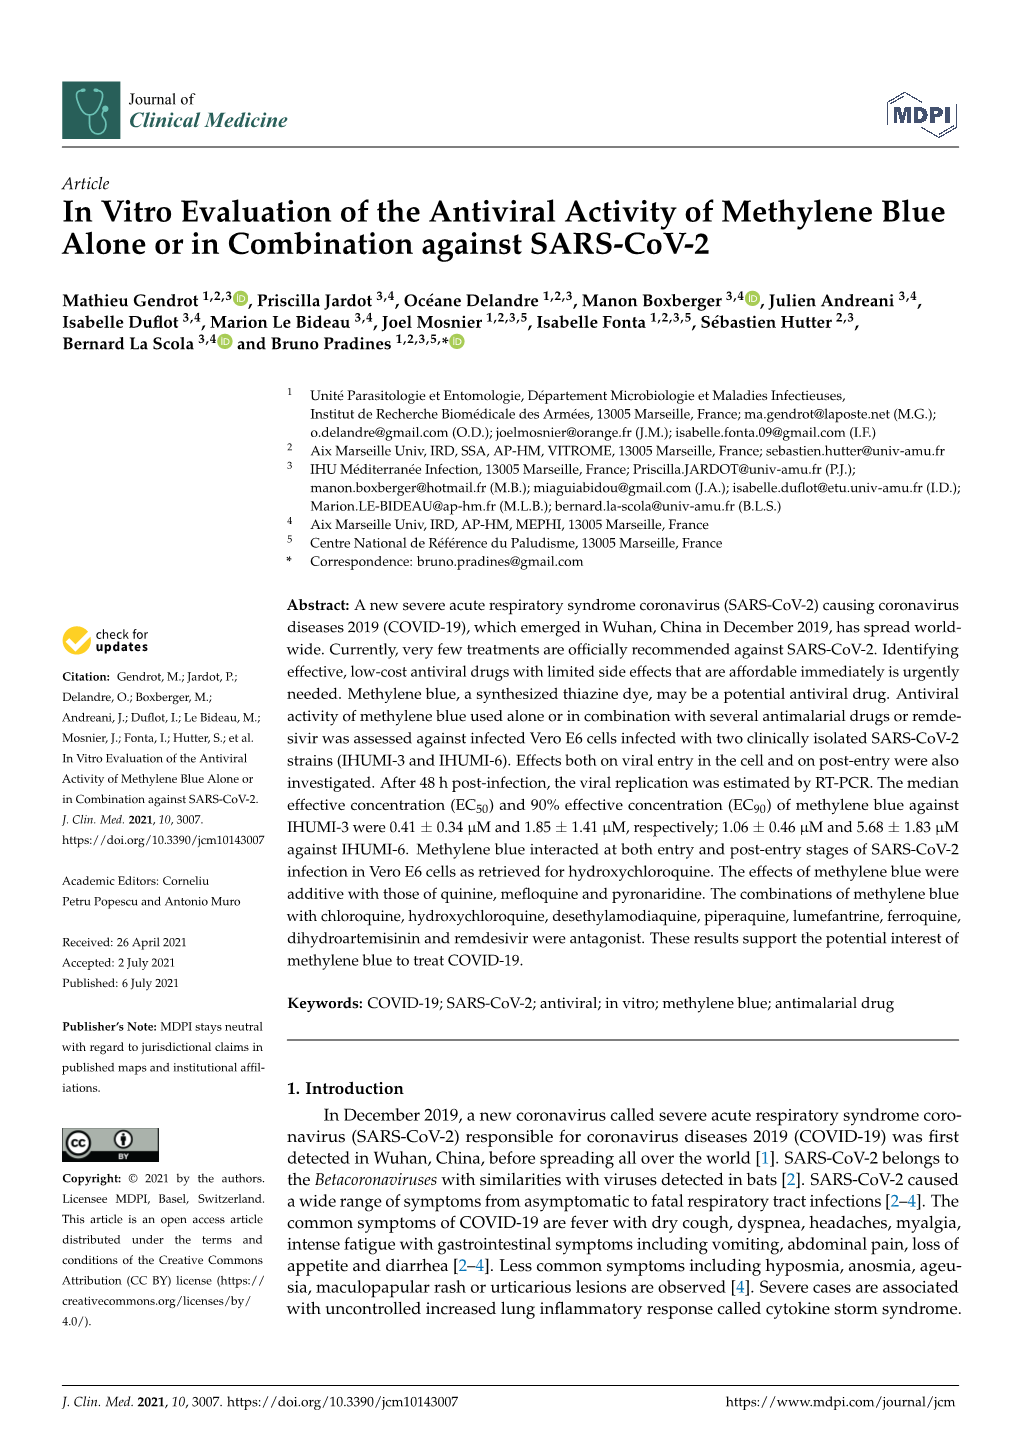 In Vitro Evaluation of the Antiviral Activity of Methylene Blue Alone Or in Combination Against SARS-Cov-2